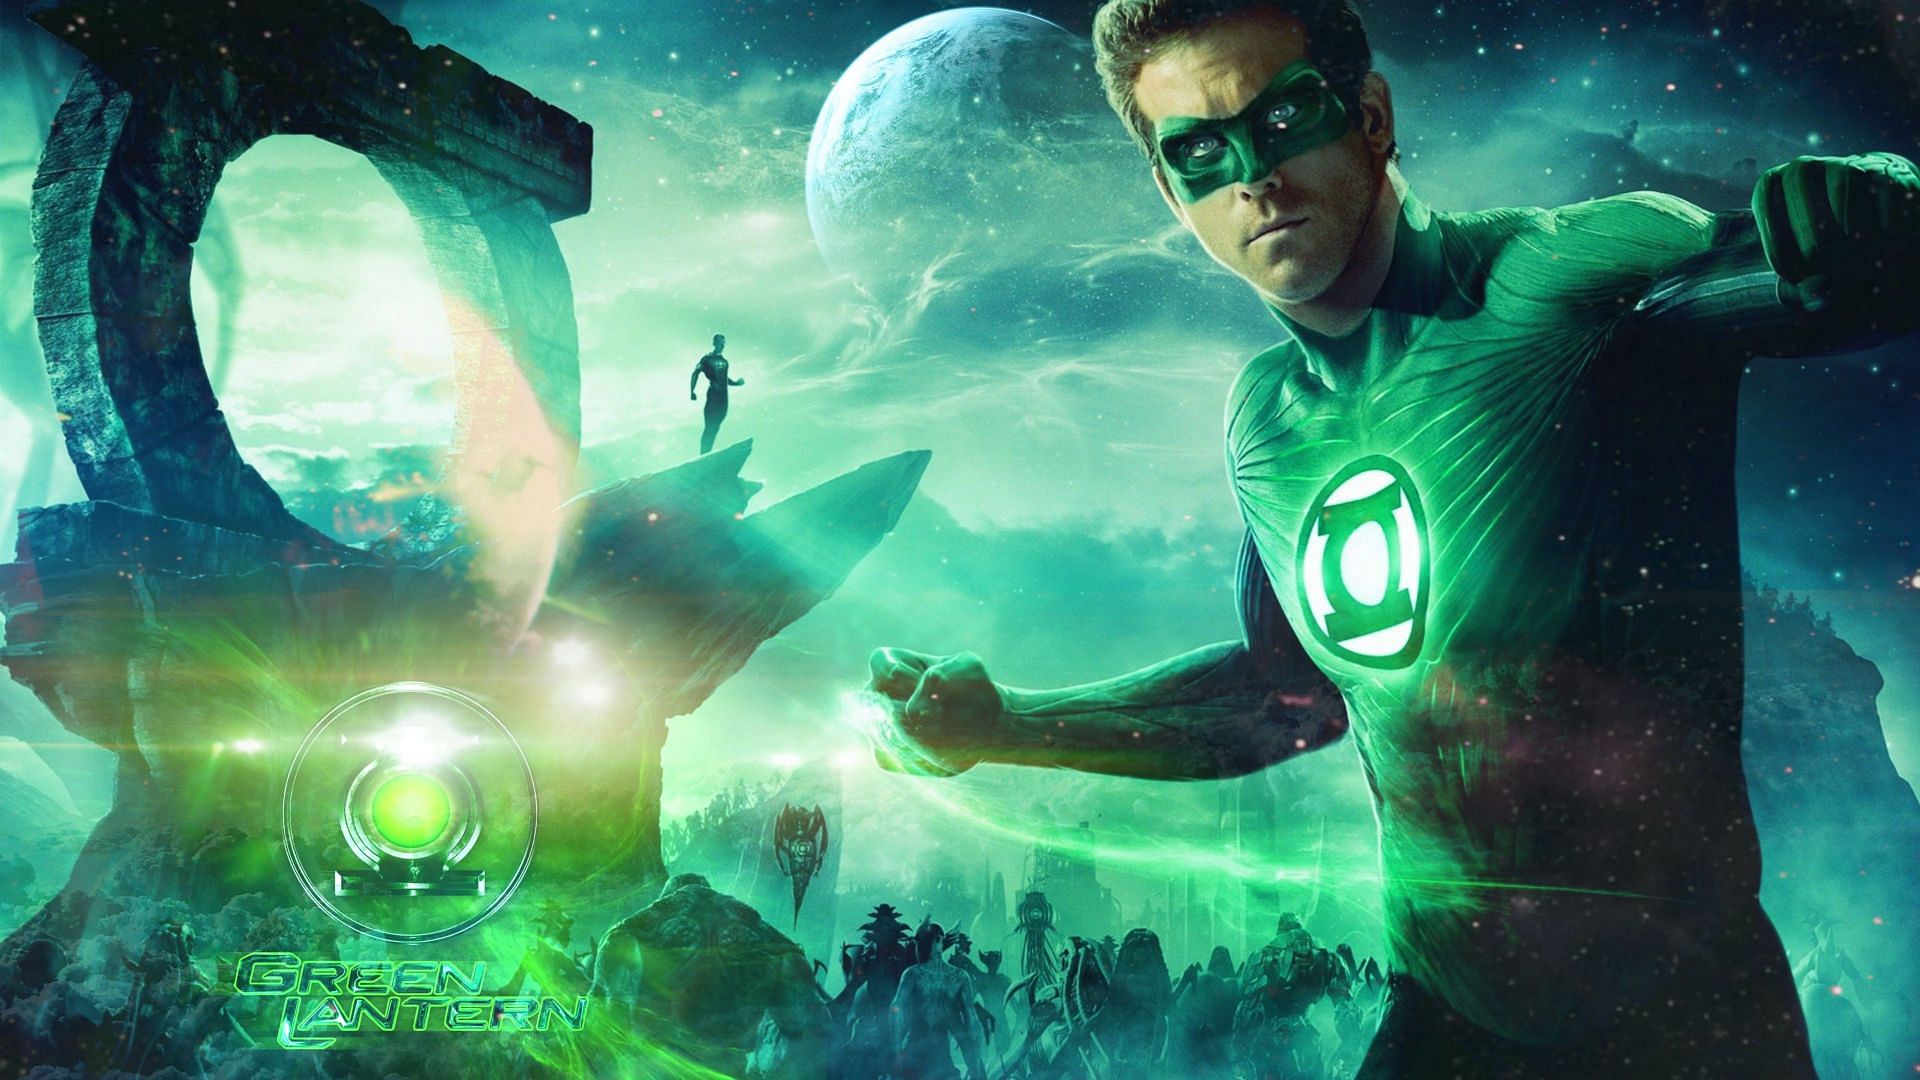 One of the most highly anticipated additions is the new Green Lantern series. (Image Via Sportskeeda)